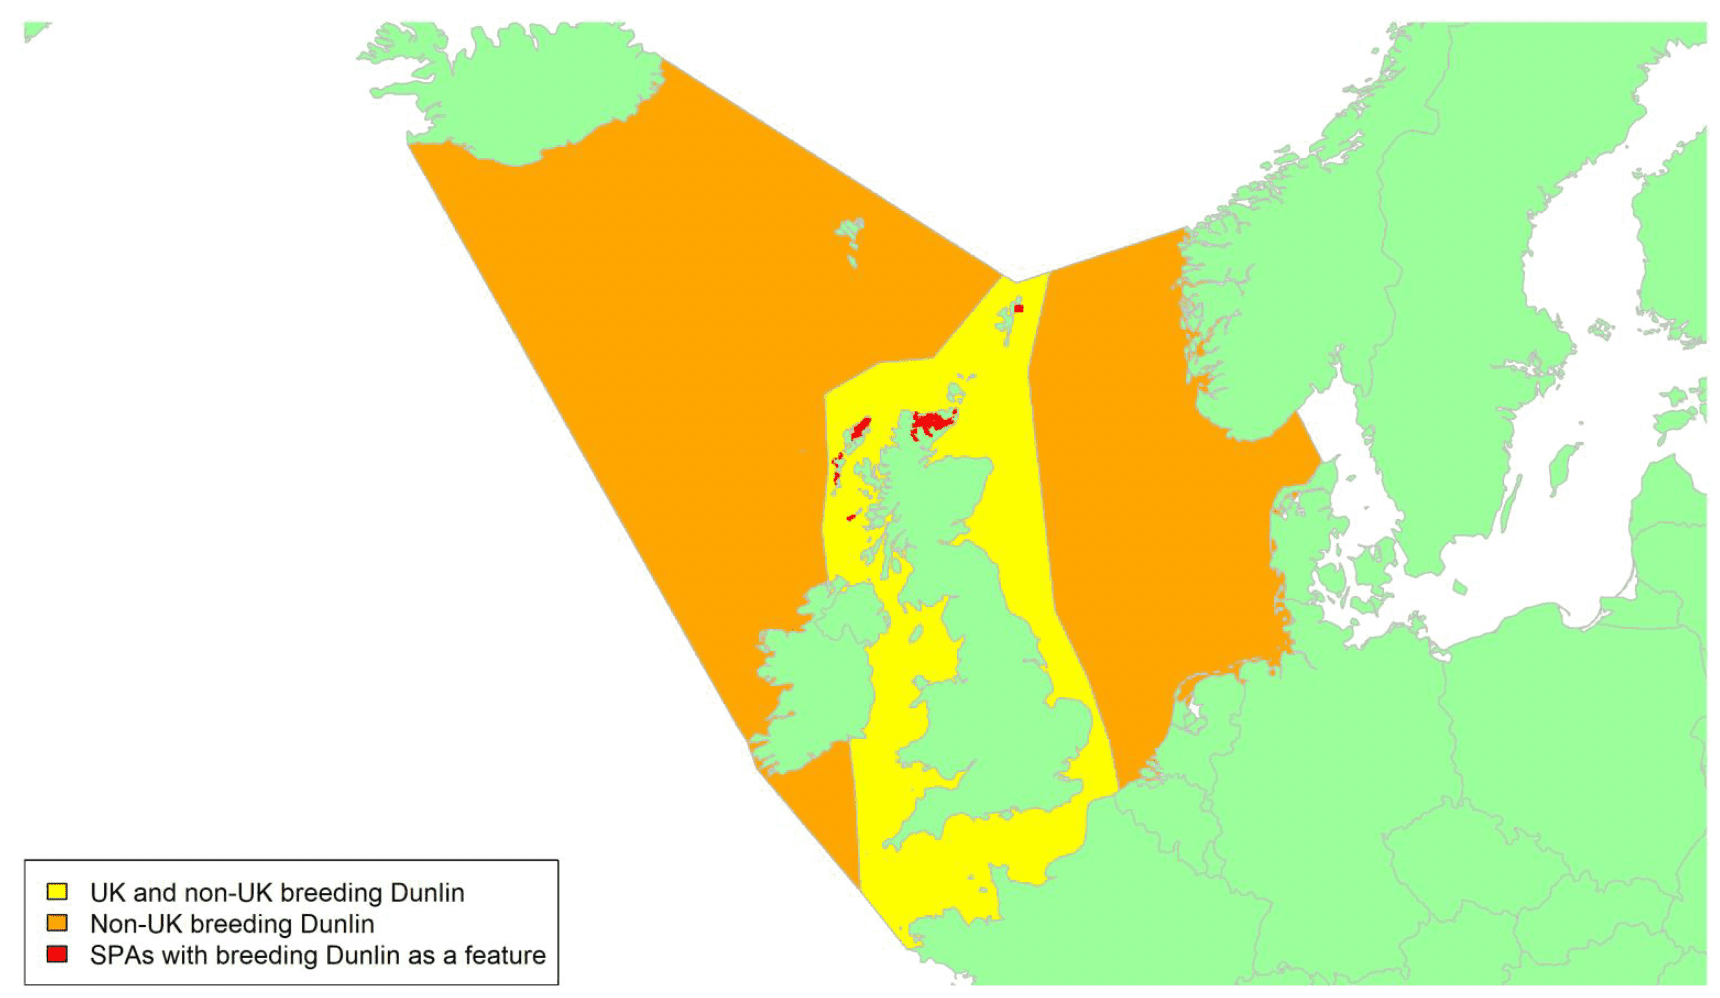 Map of North West Europe showing migratory routes and SPAs within the UK for breeding Dunlin as described in the text below.